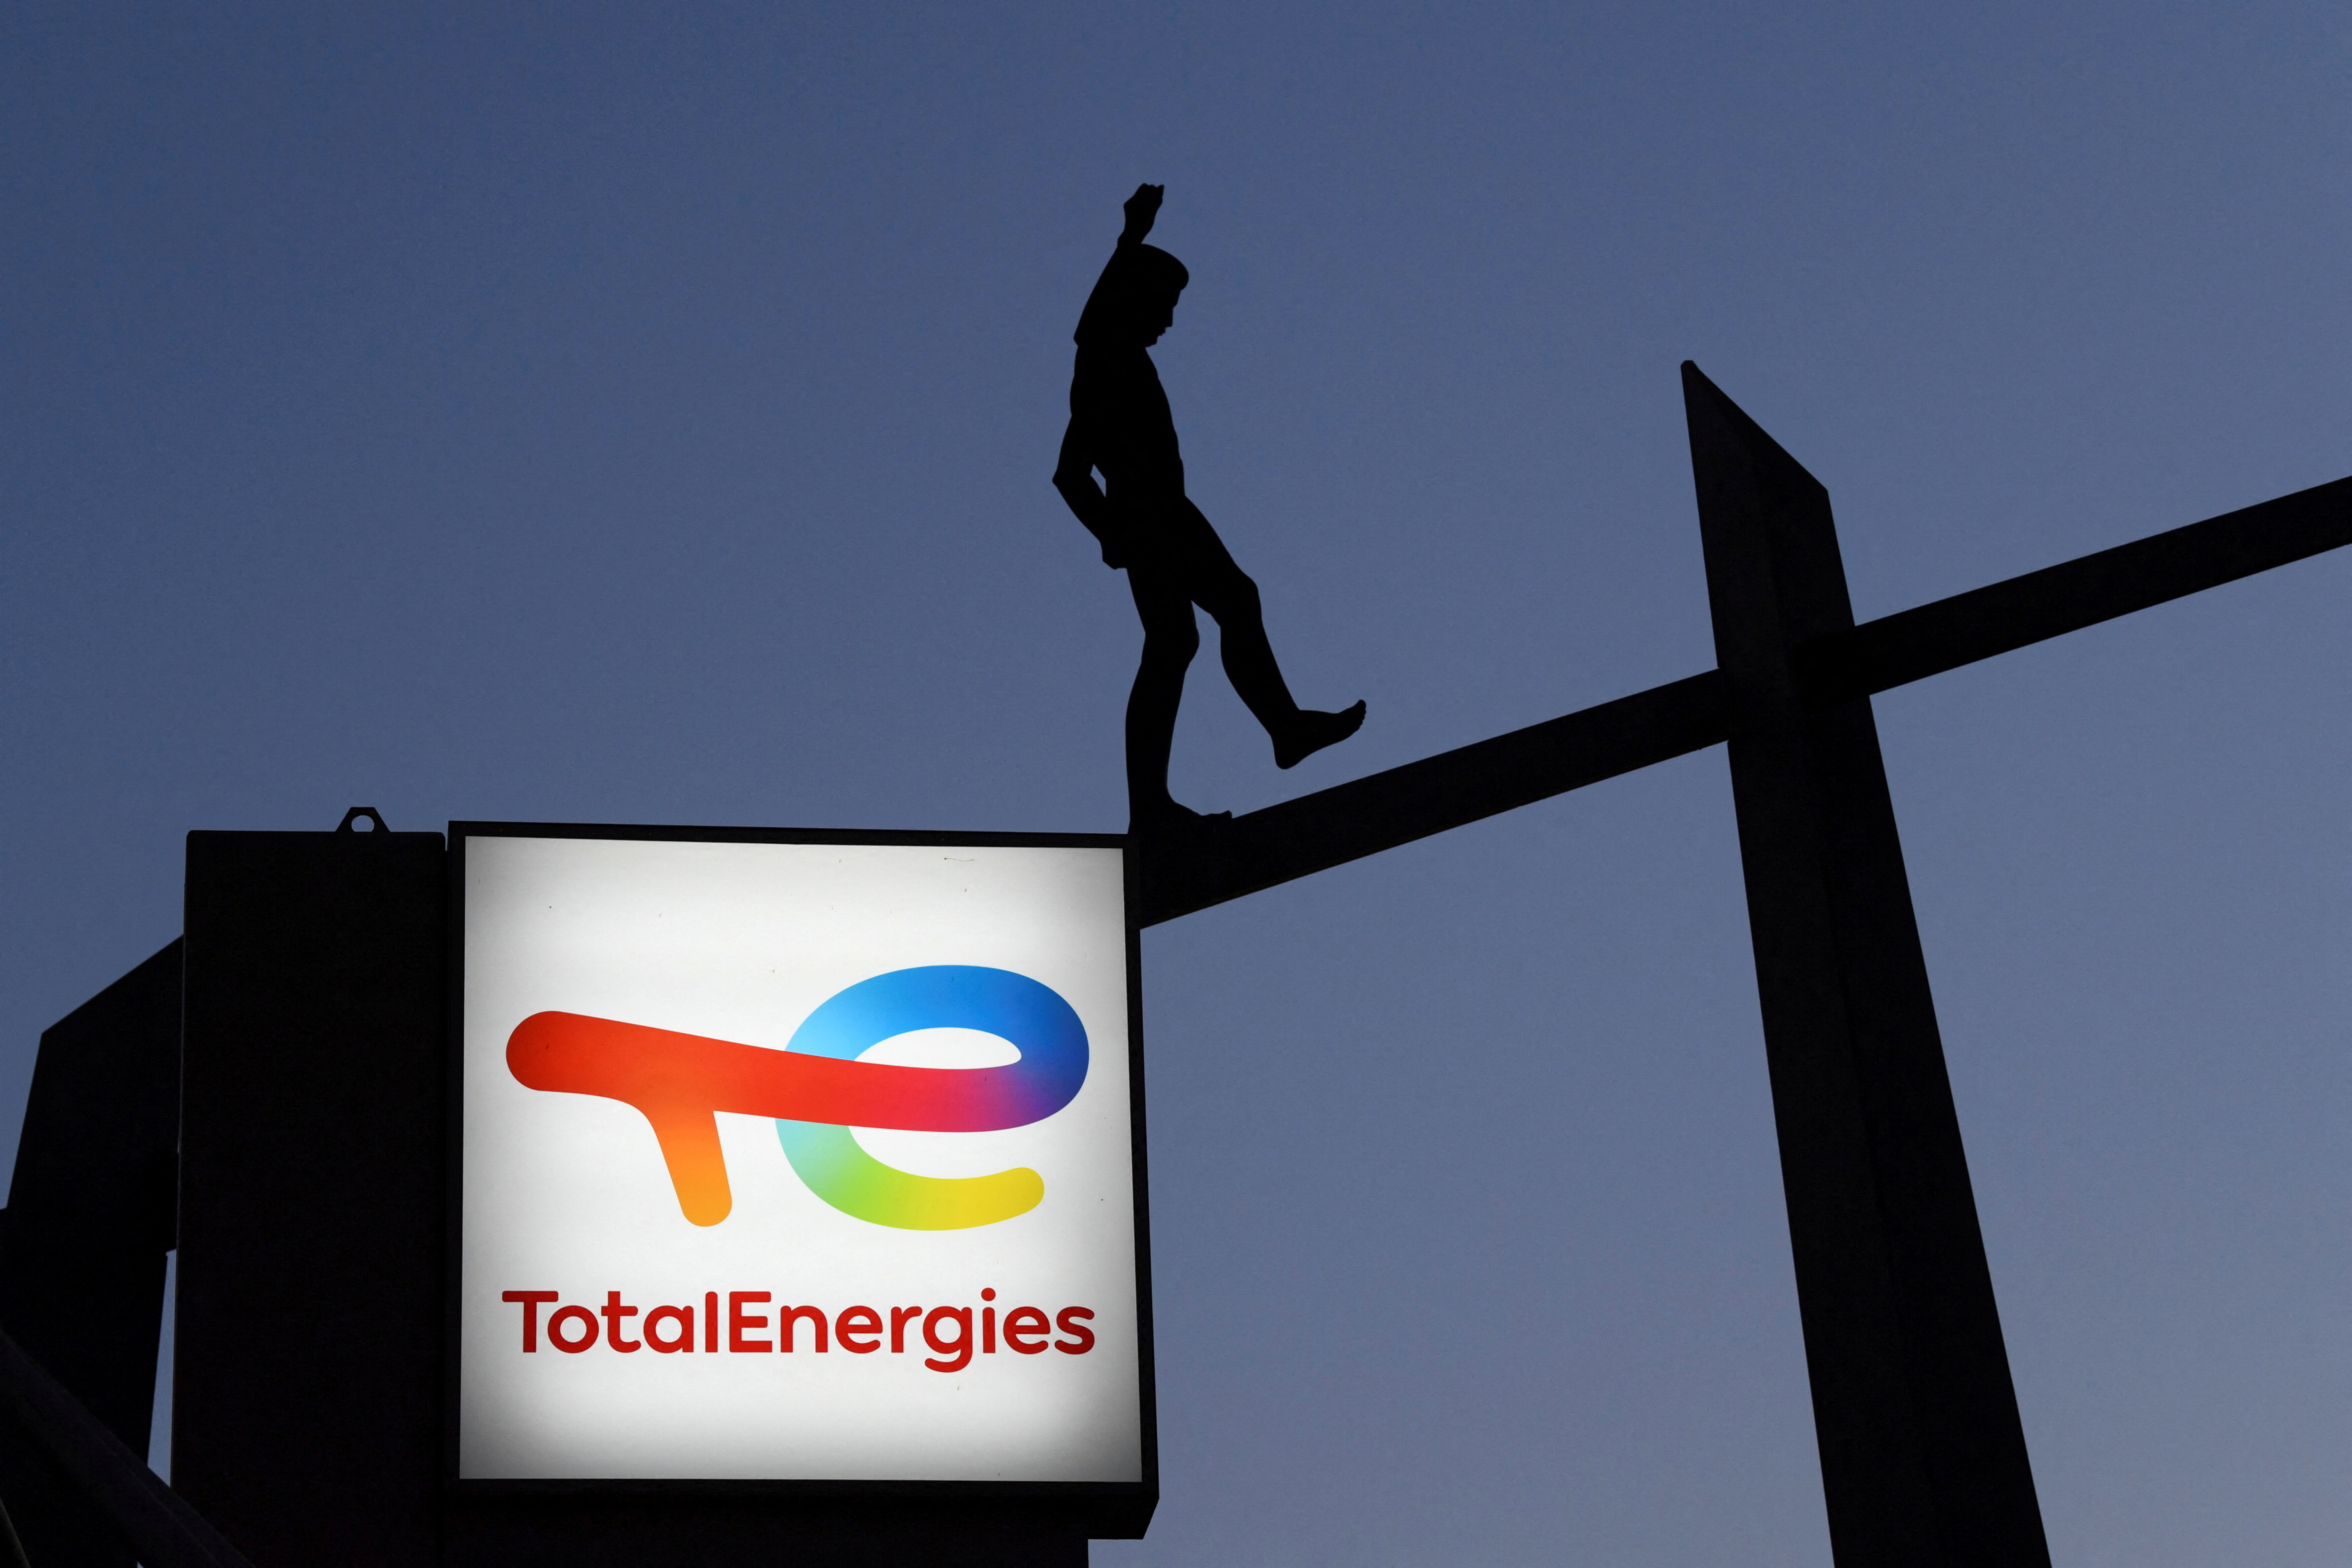 A TotalEnergies logo on a display at a fuel station in Berlin